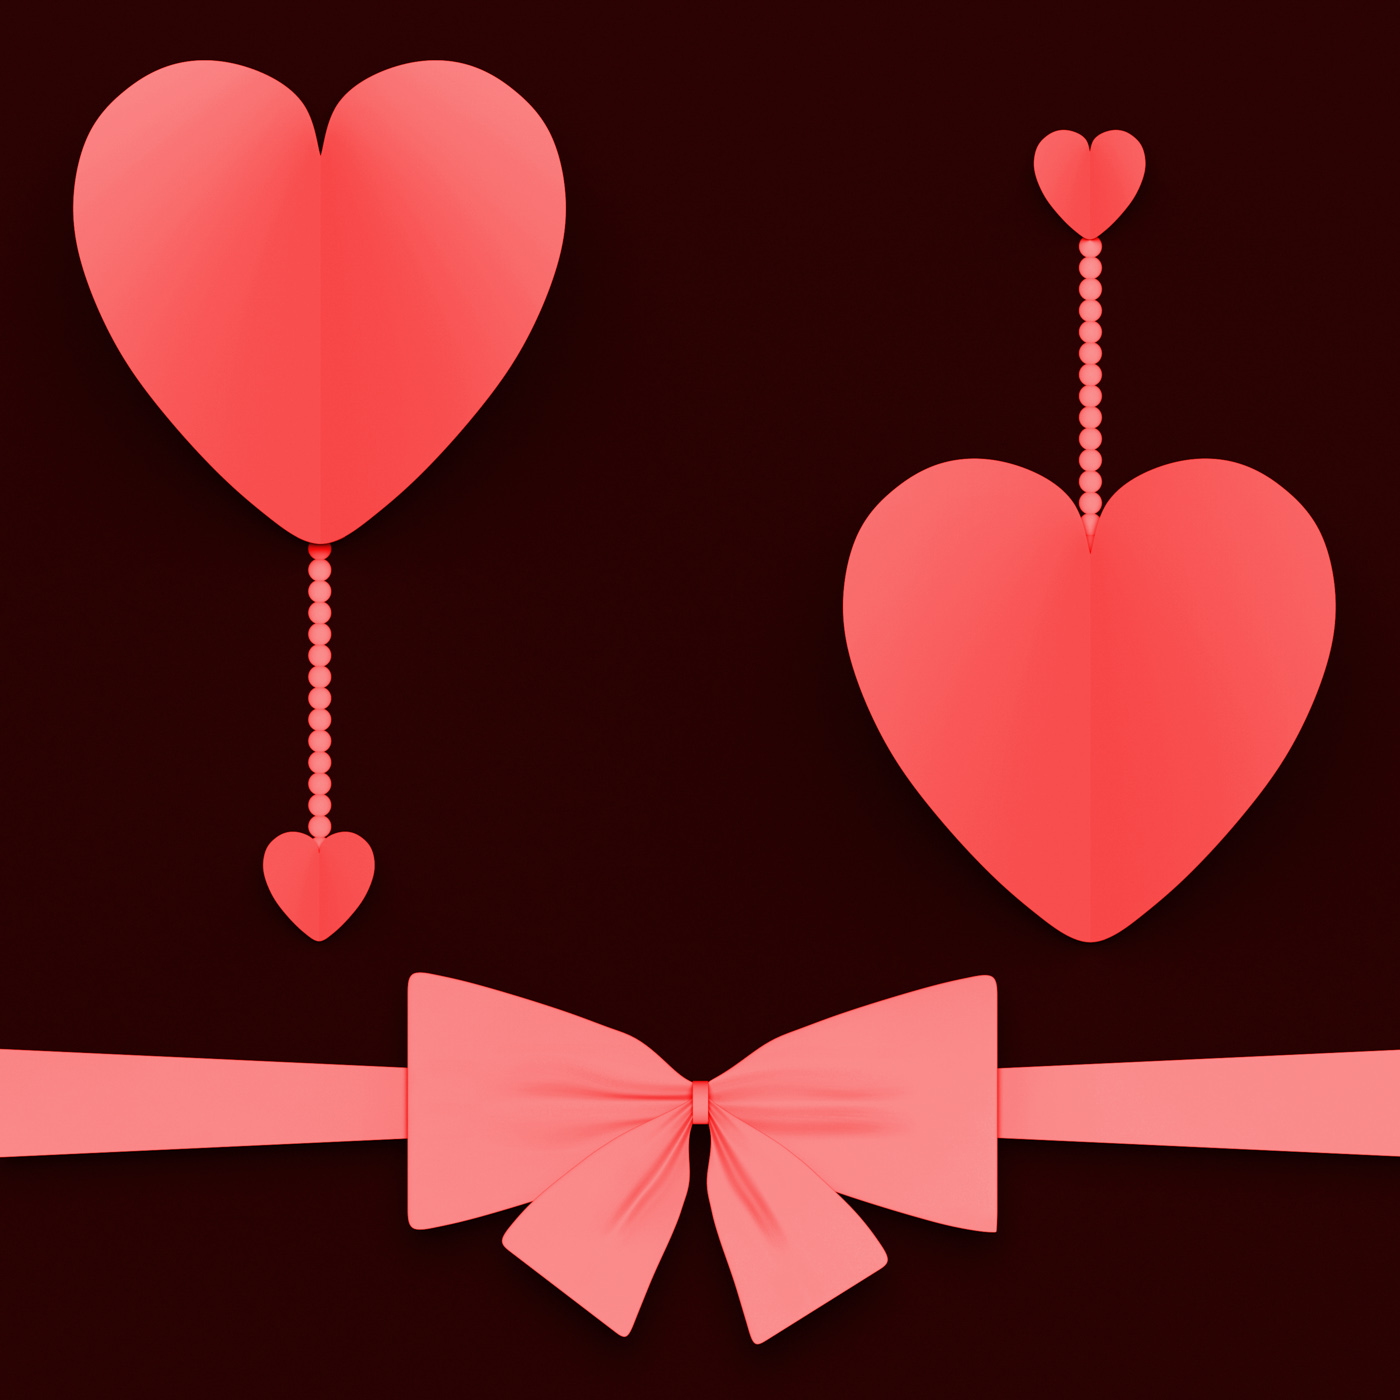 Two hearts with bow mean lovely surprise or romantic gift photo